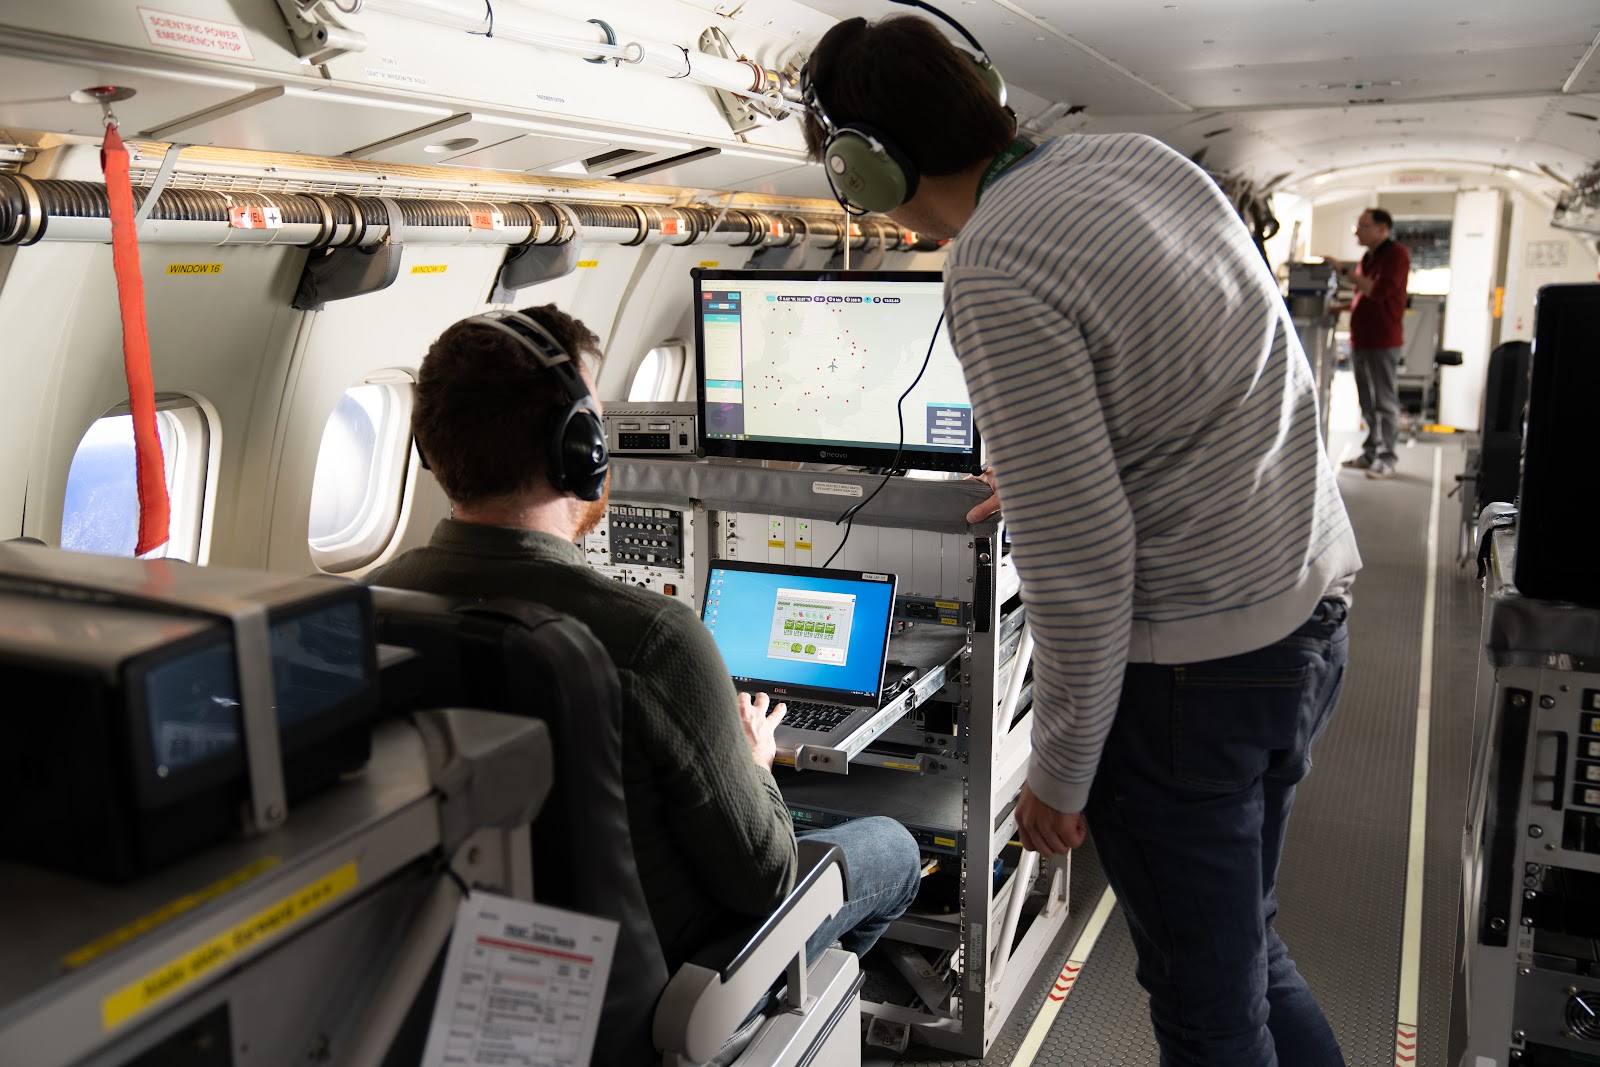 Three people working inside a research aircraft. One person is sat looking at a computer screen with another person standing looking at the screen. One person is standing looking at a laptop screen.